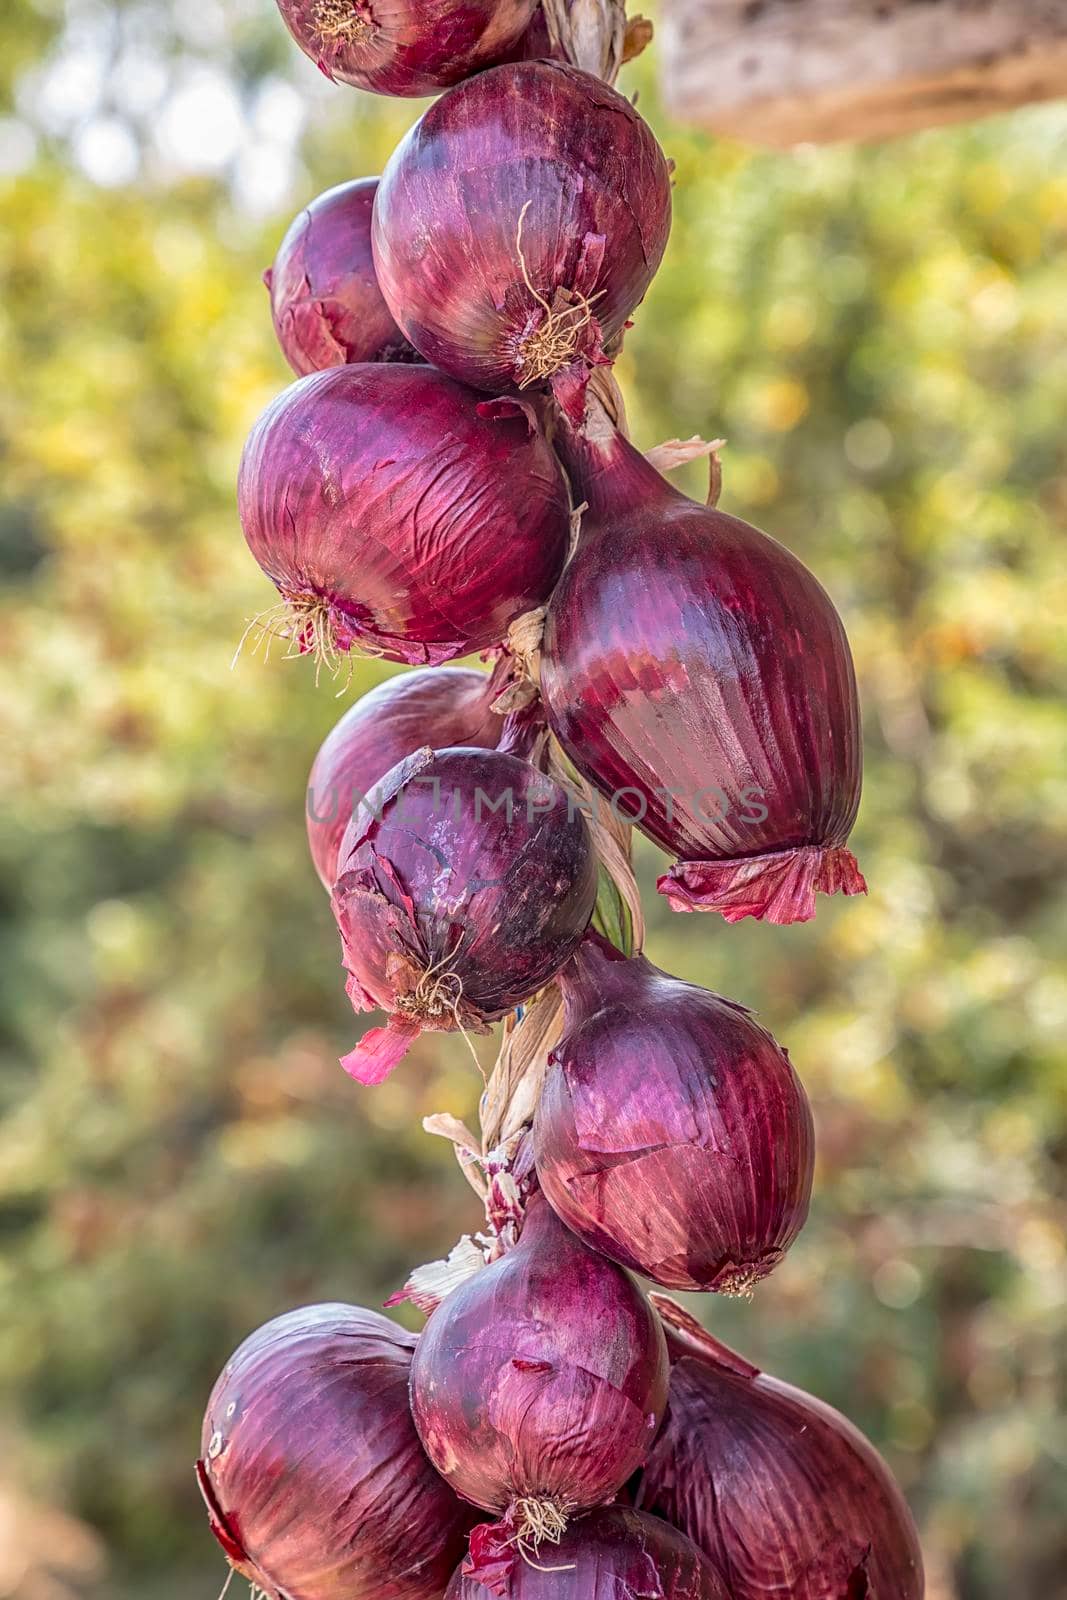 A close view of the hanging bunch bundle of the red onion   